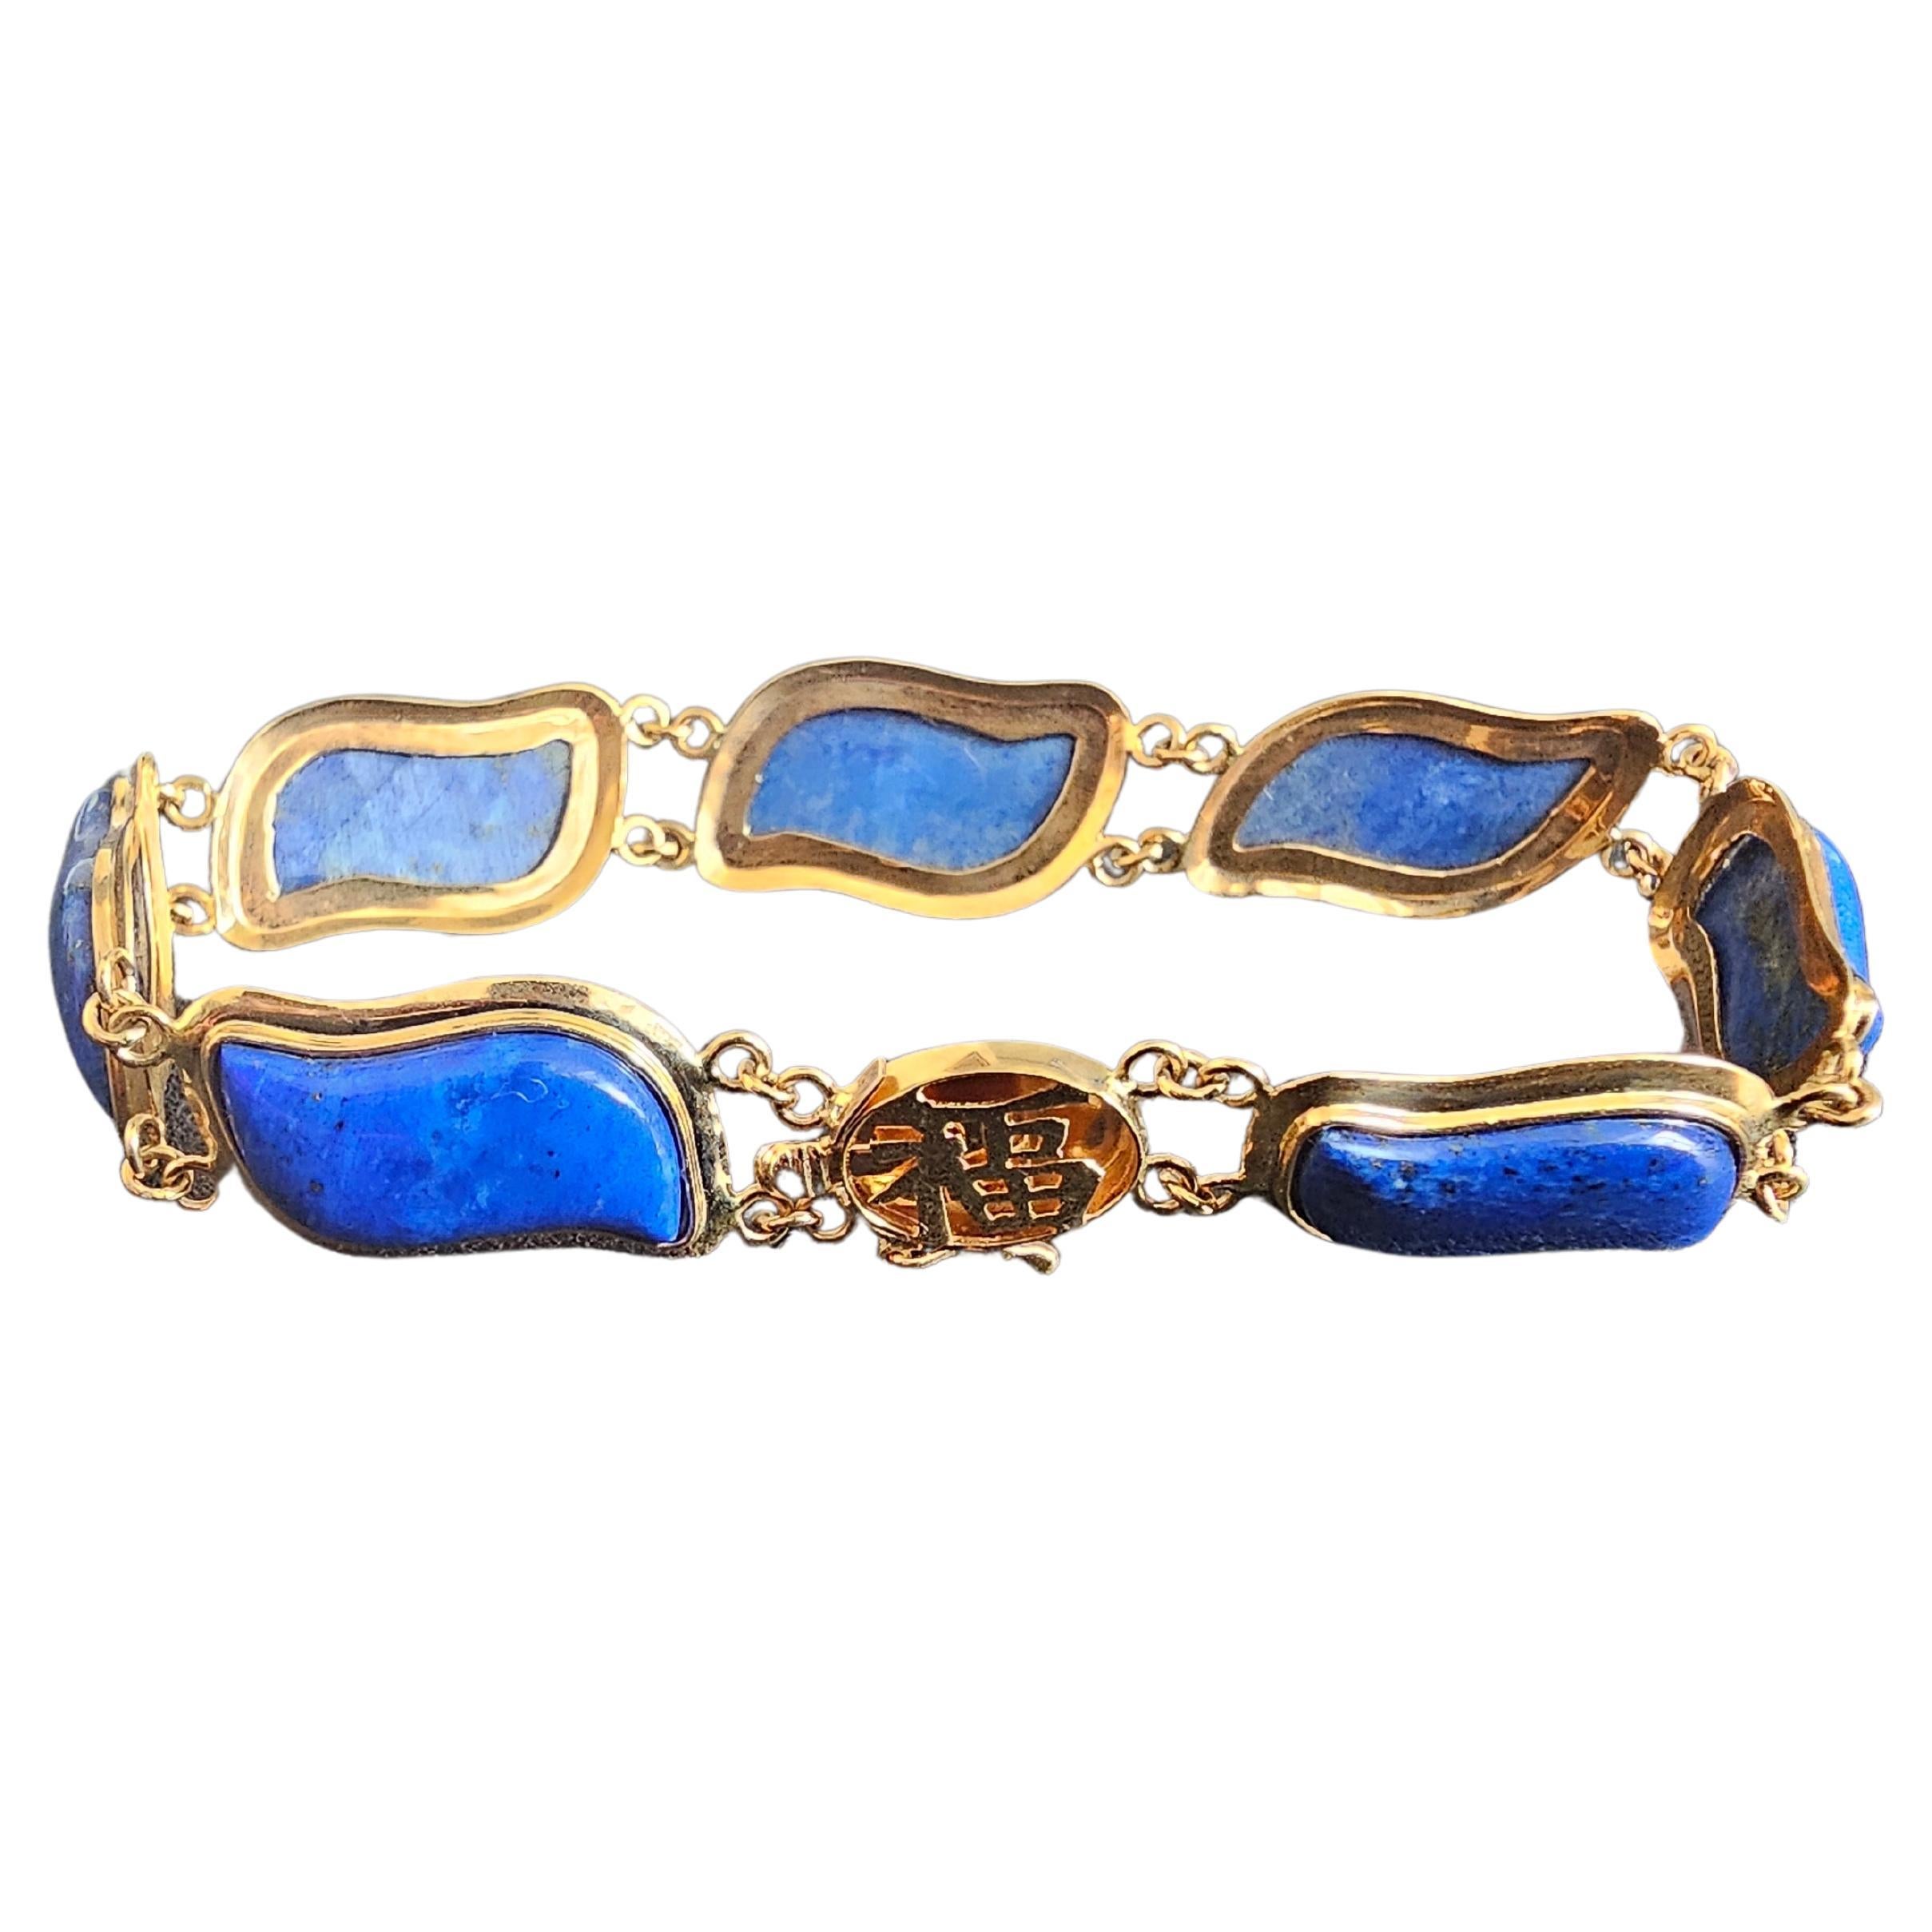 Blue Lapis Lazuli Bracelet Aurora Double Chained with 14K Solid Yellow Gold For Sale